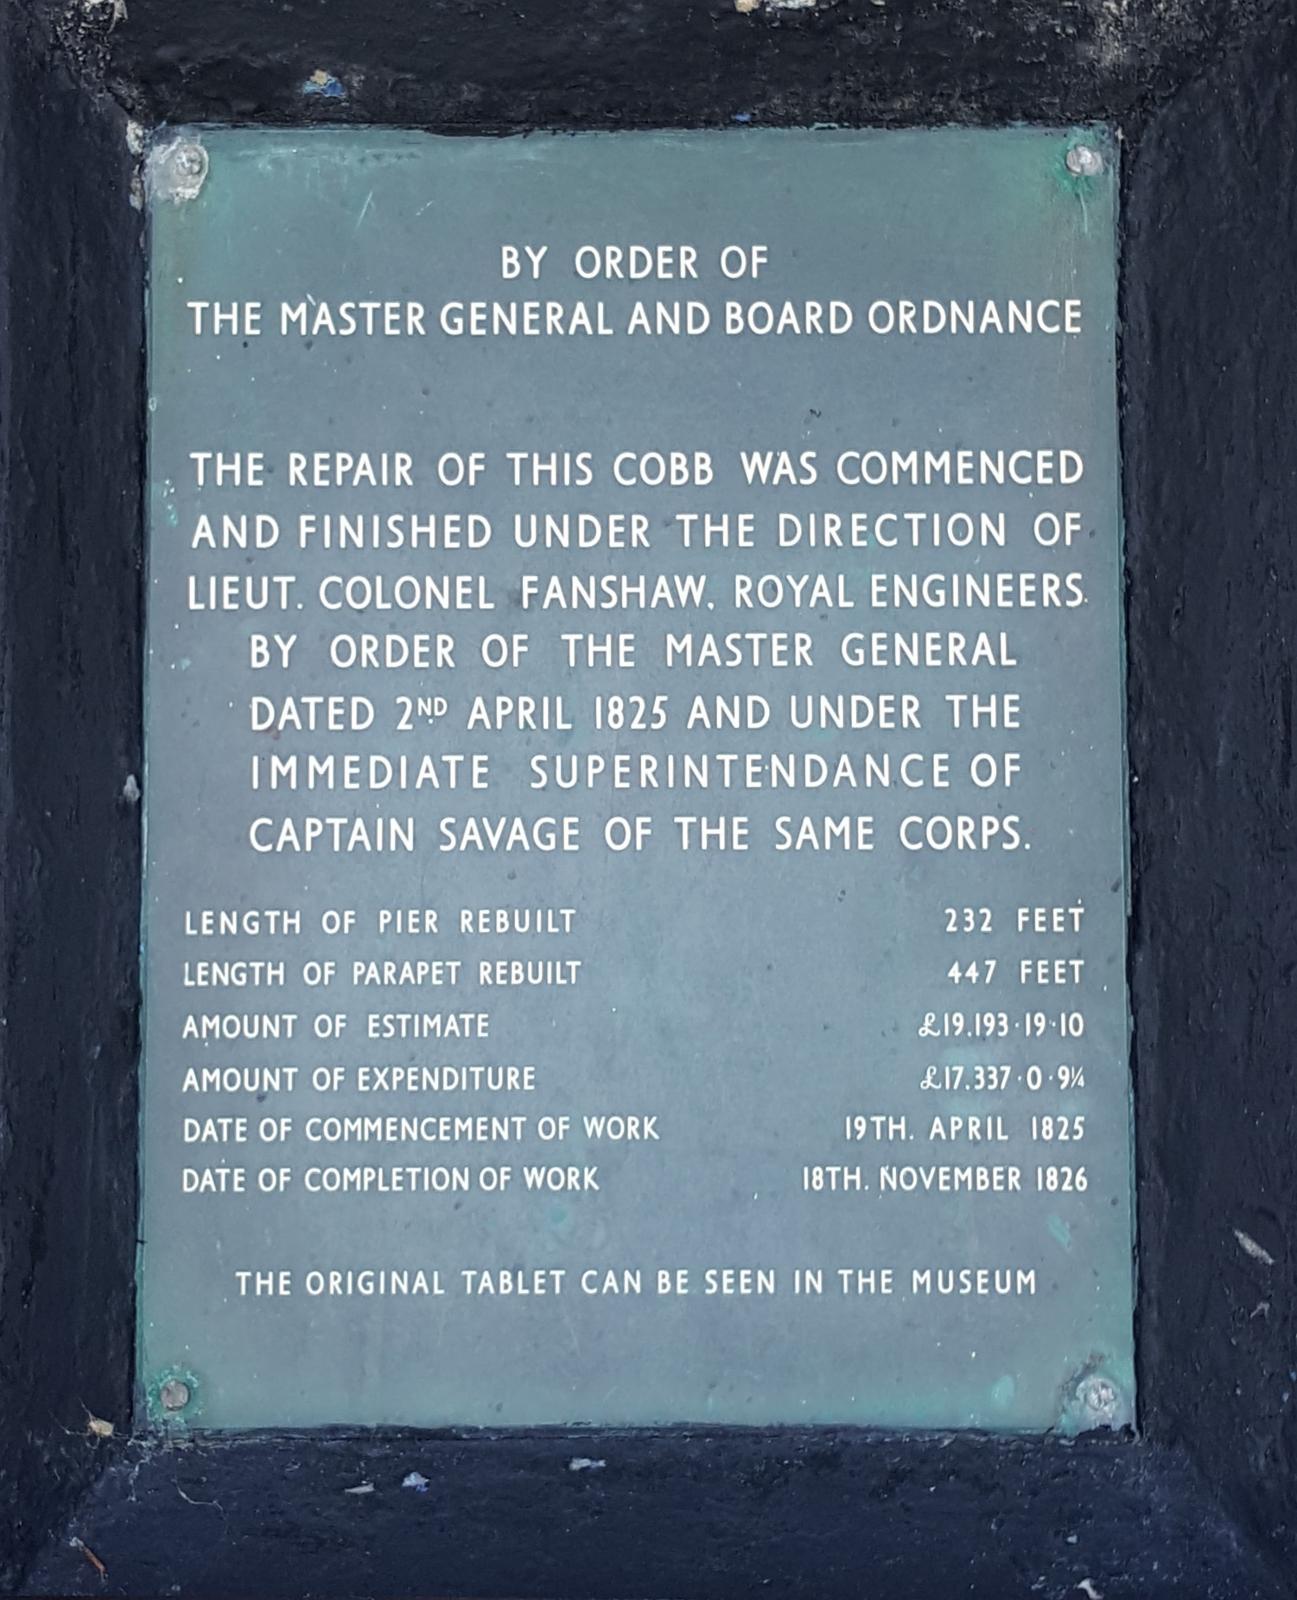 Plaque inside Gin Shop commemorating repairs to the Cobb